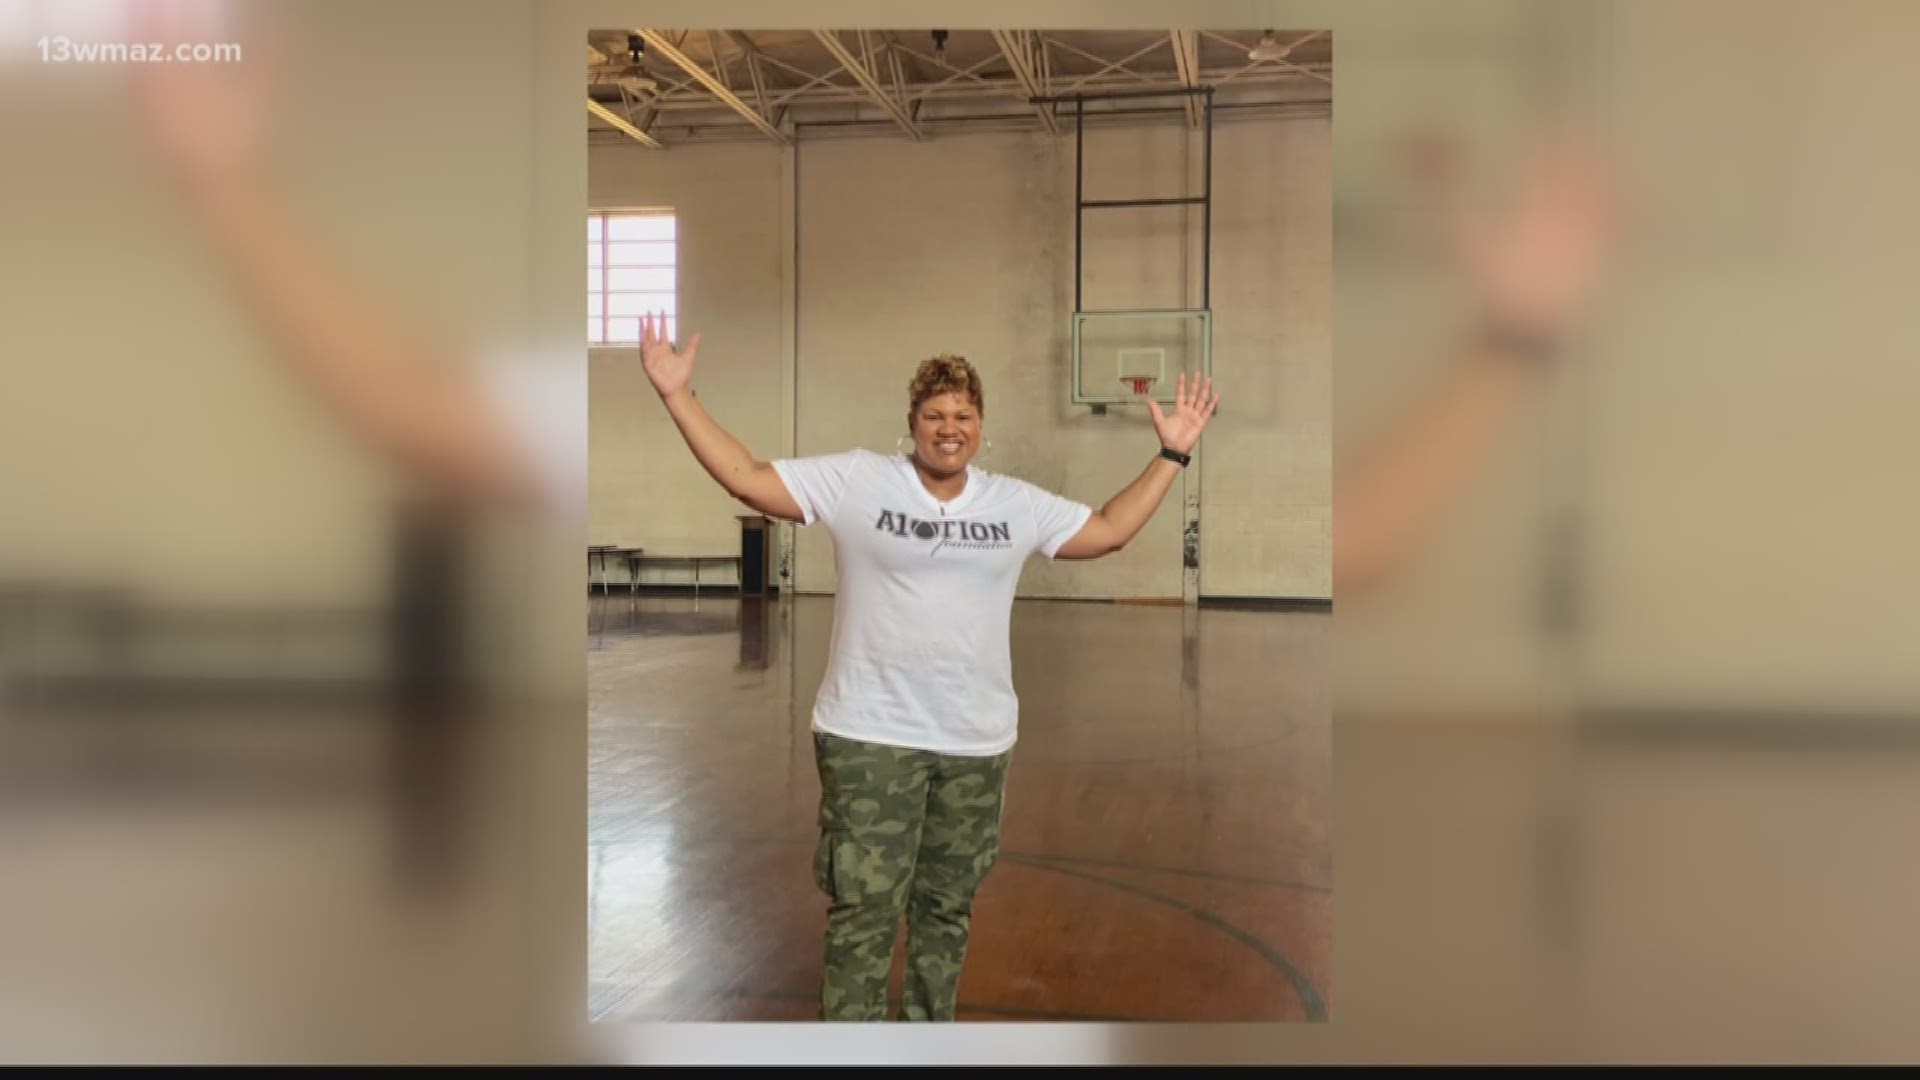 A former Peach County High School basketball star wants to help her hometown rebound by campaigning for a new Fort Valley youth center.